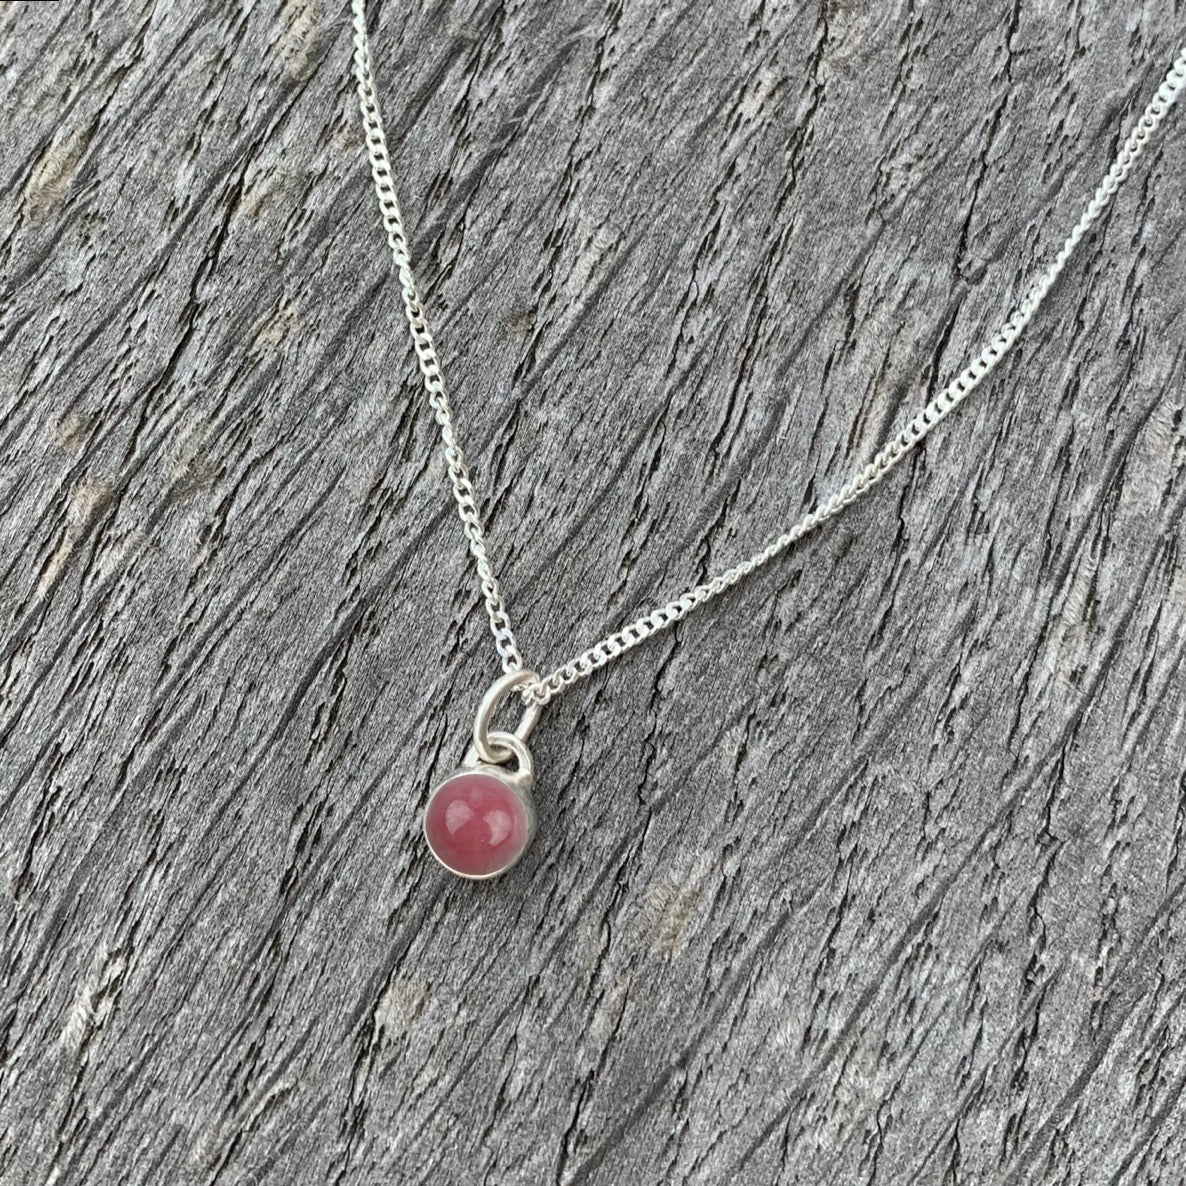 A rhodochrosite stone set in silver on a sterling silver chain.